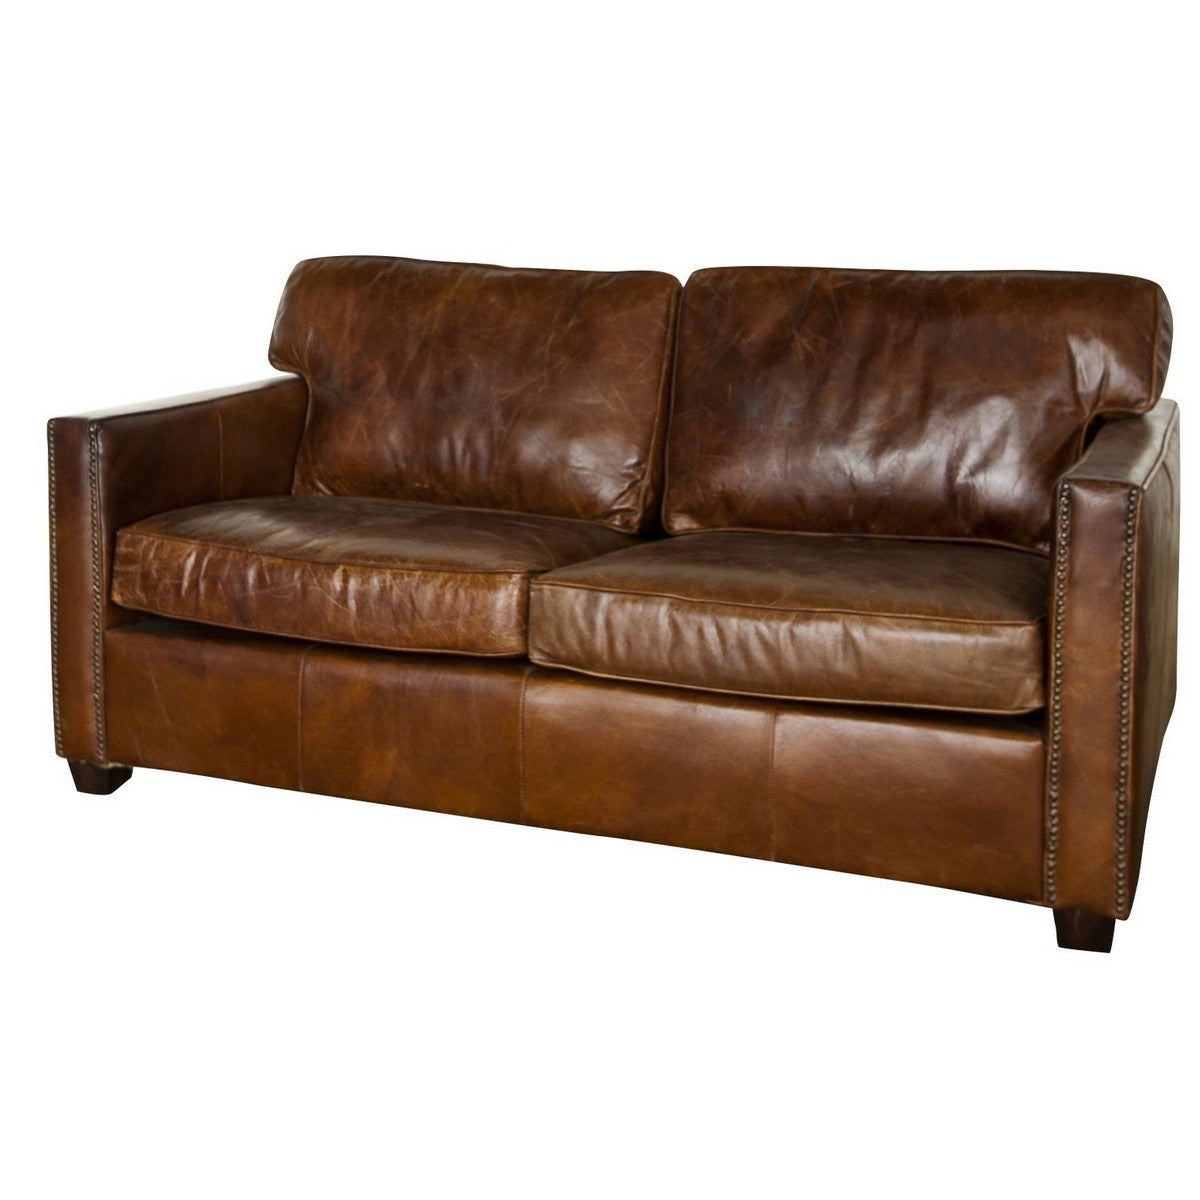 Couch - 2 seater leather brown